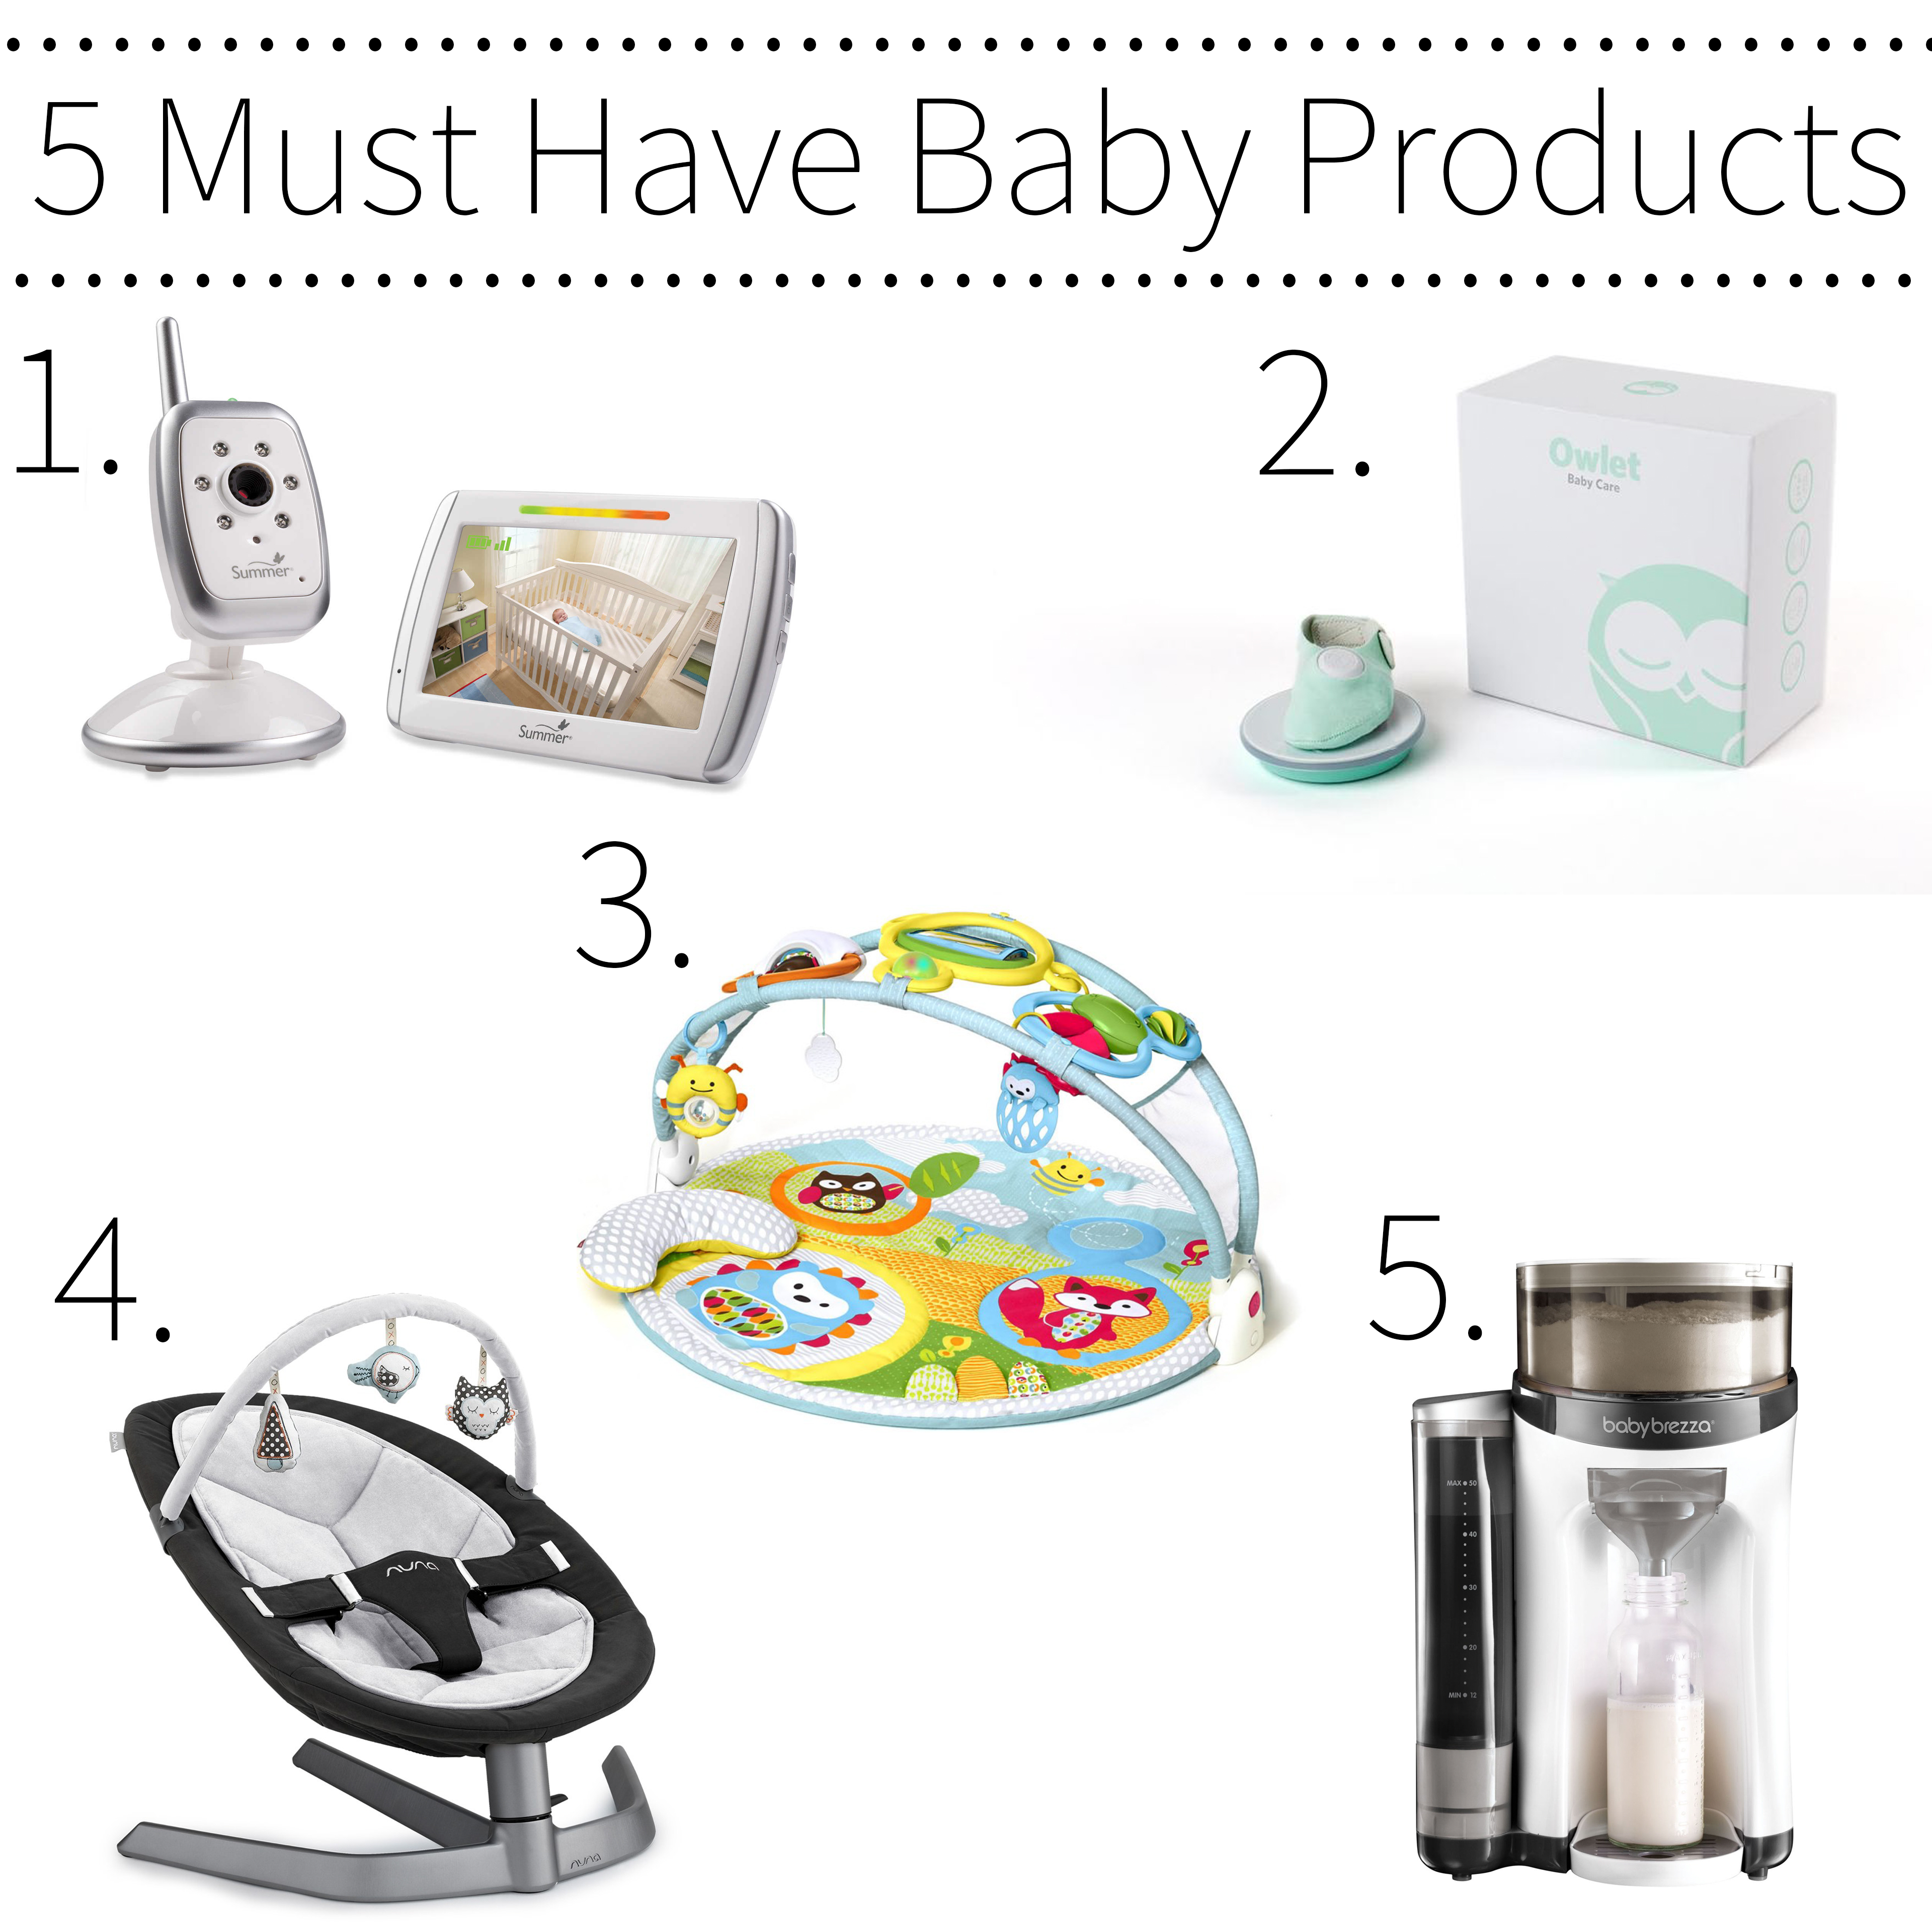 5-Must-Have-Baby-Products-Collage